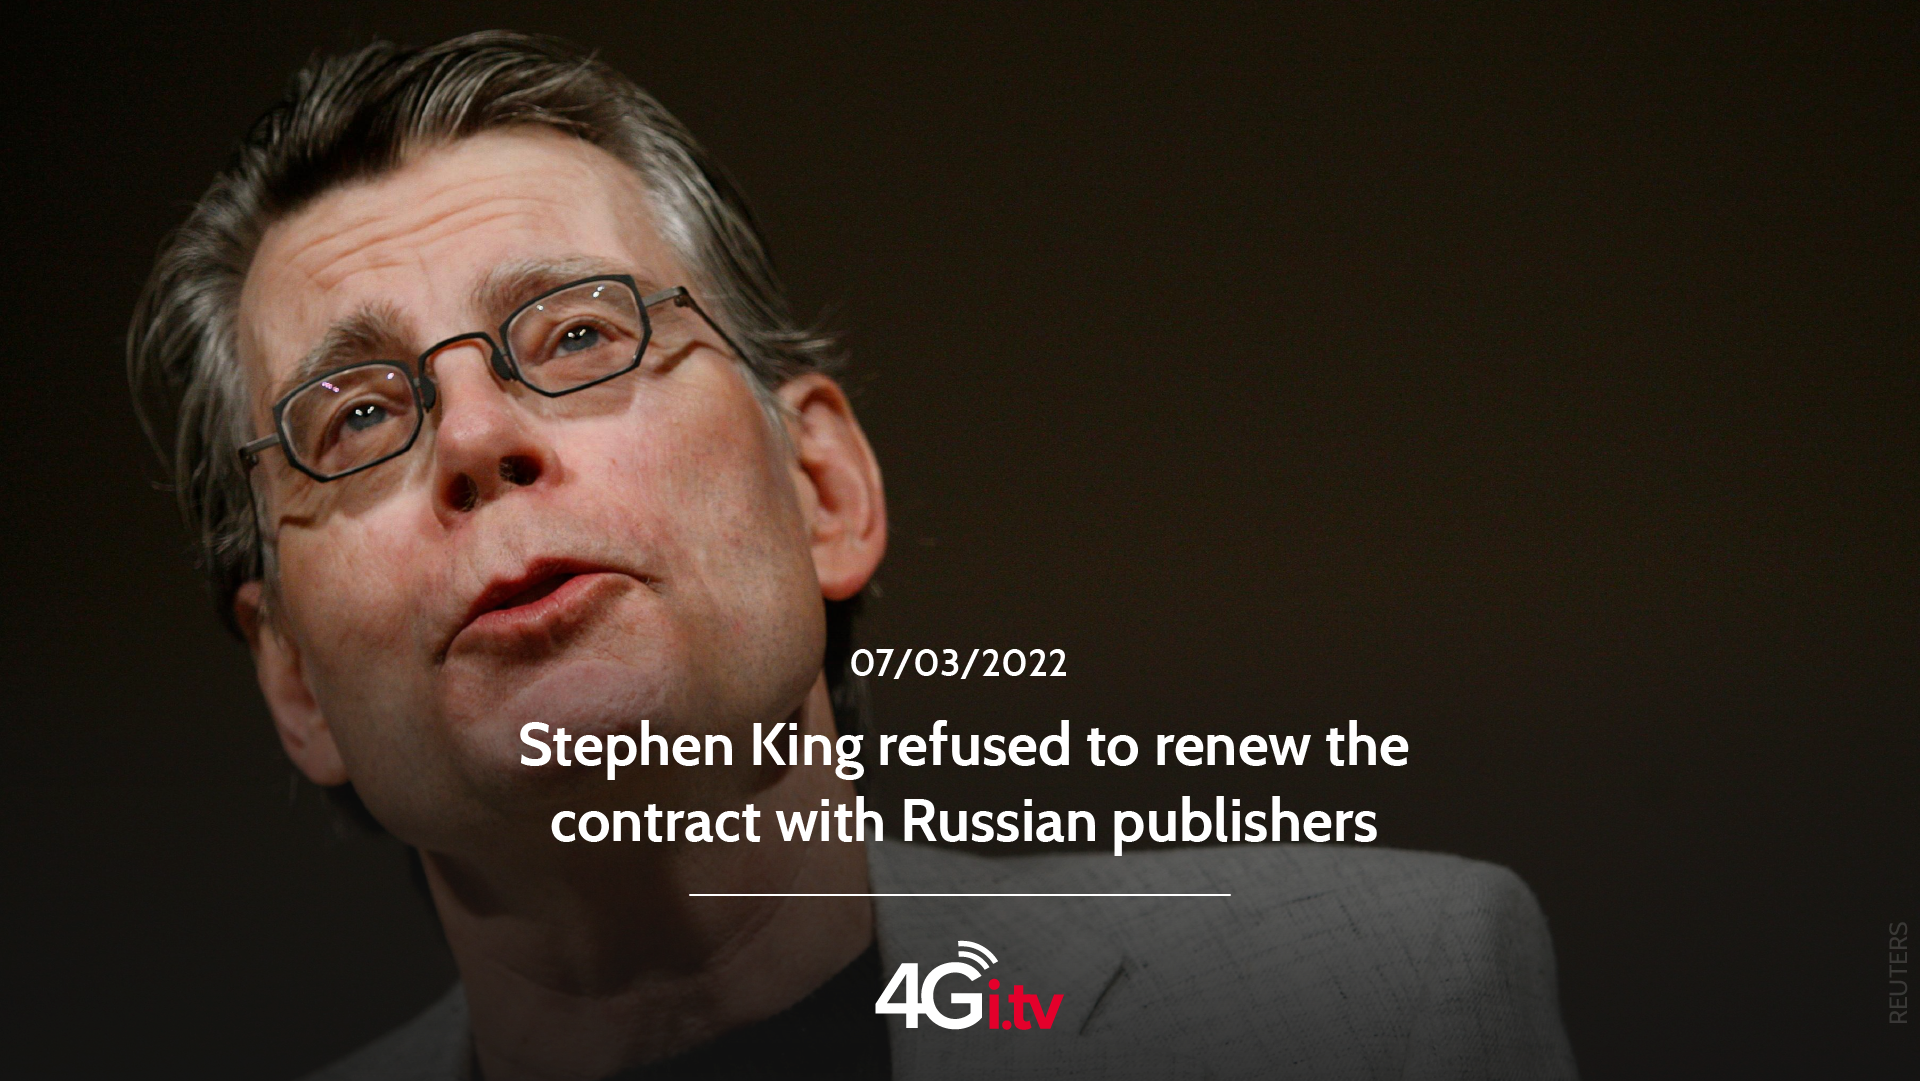 Lesen Sie mehr über den Artikel Stephen King refused to renew the contract with Russian publishers